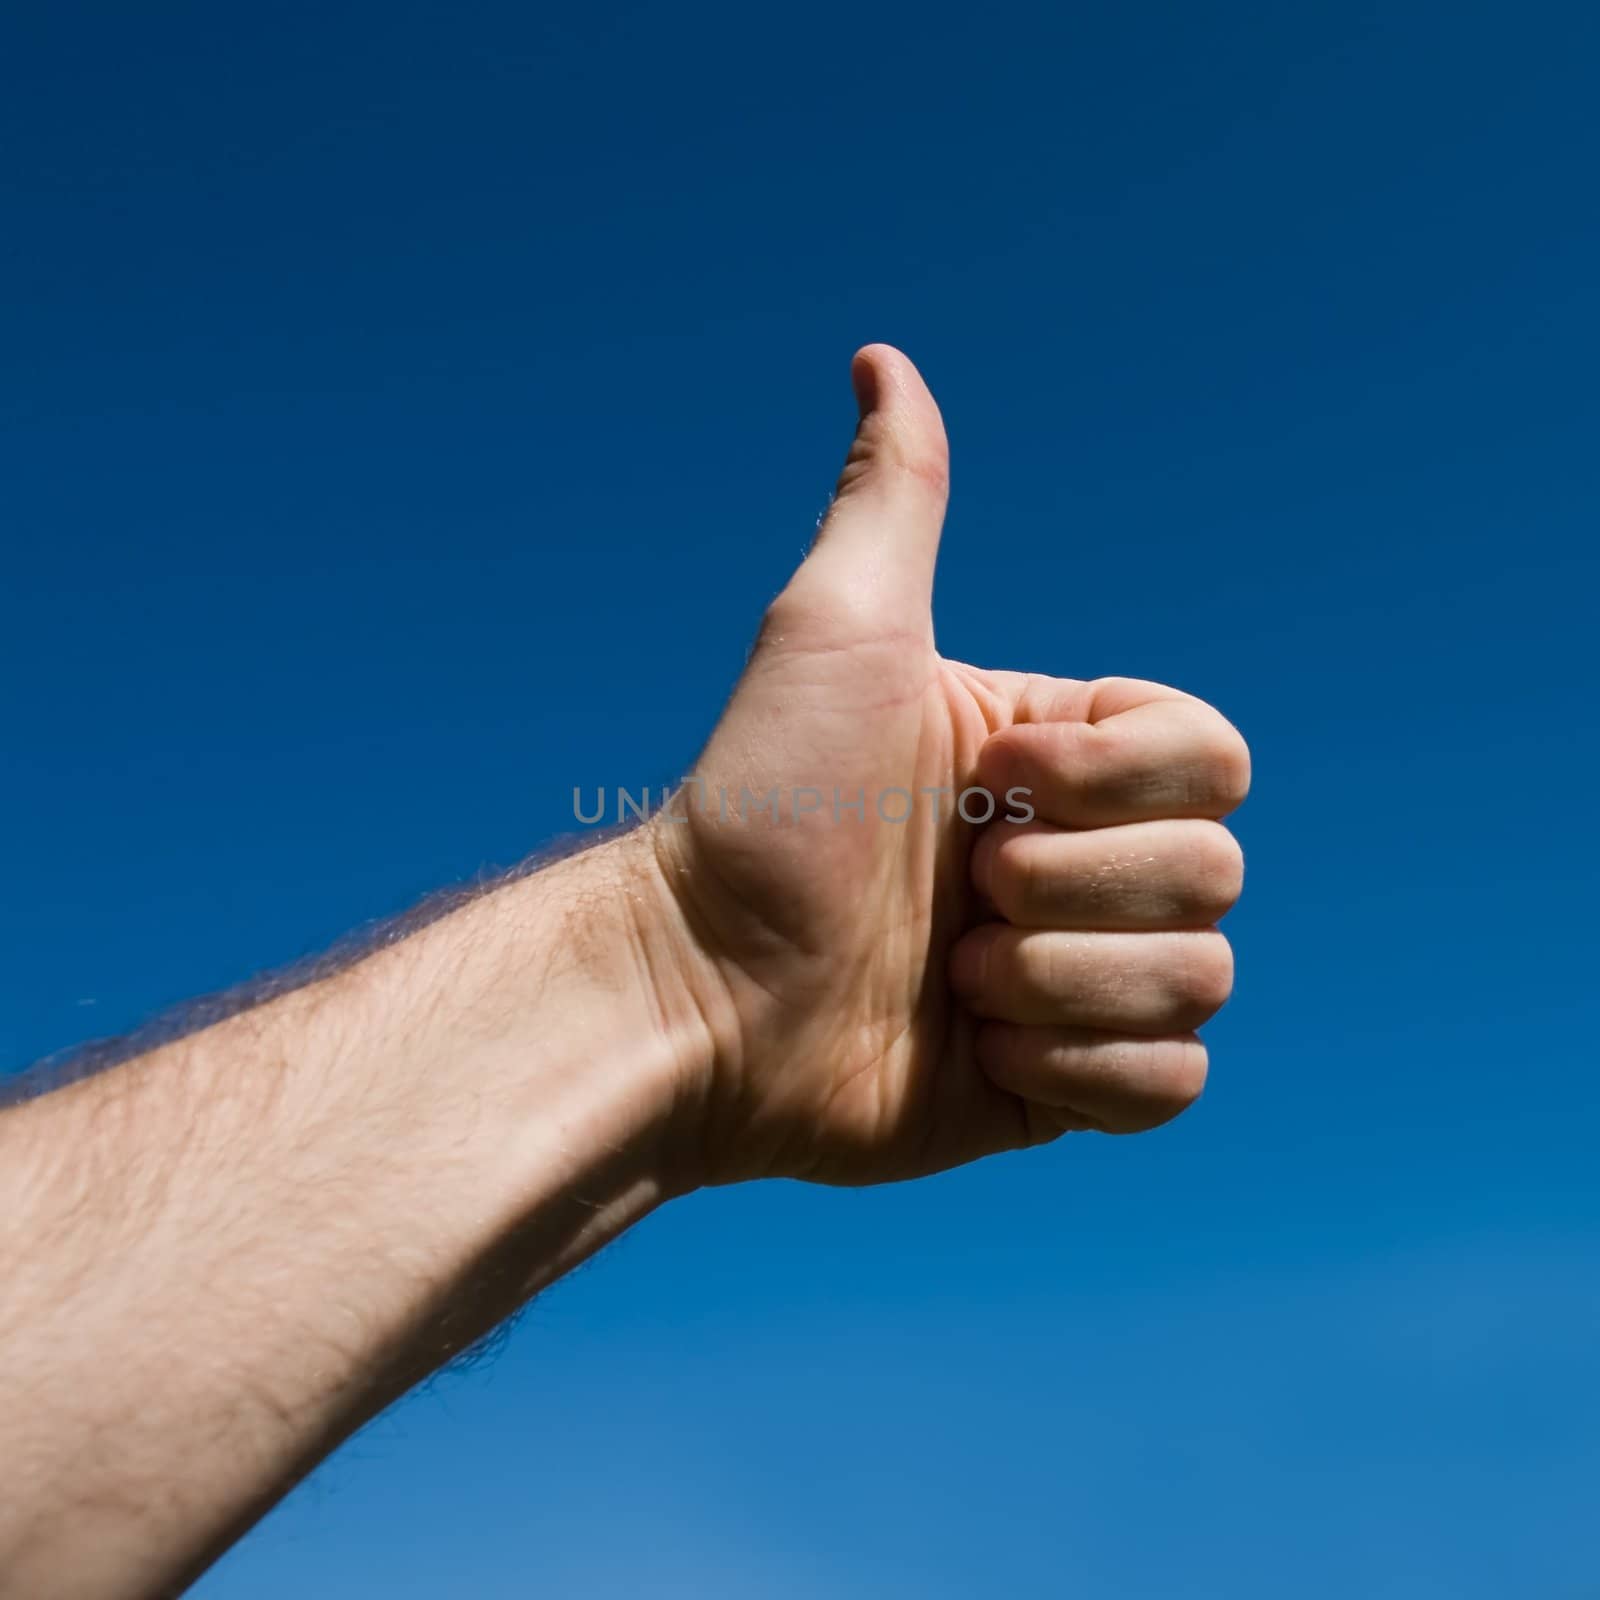 raising thumb up with blue sky at background